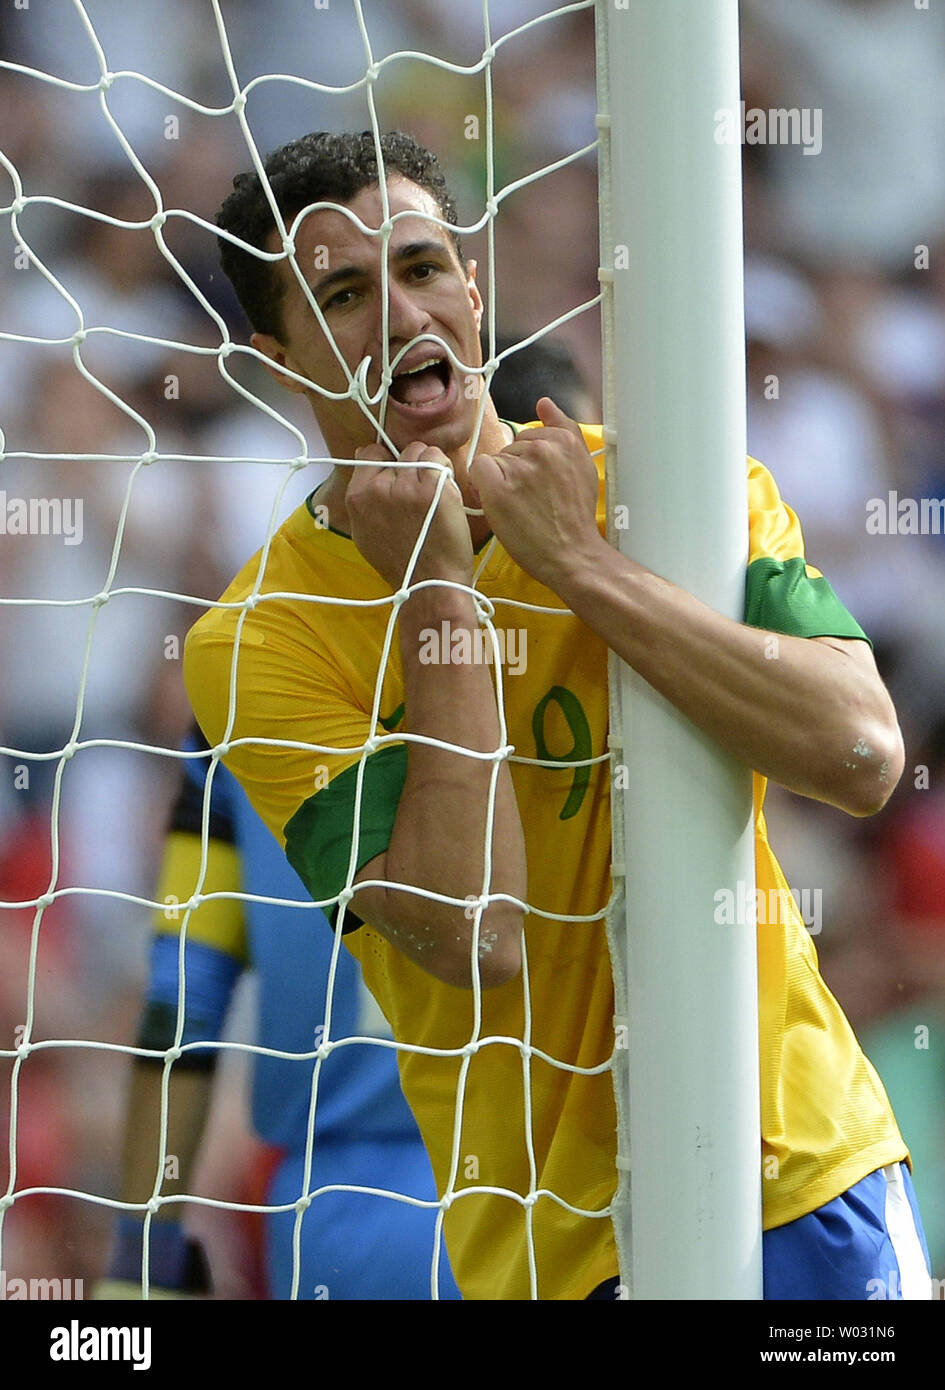 Forward Leandro Damiao of Brazil reacts after Brazil missed a shot on goal during the second half of the Gold Medal Football Match against Mexico at the London 2012 Summer Olympics on August 11, 2012 at Wembley Stadium, London. Mexico defeated Brazil 2-1 to win the Gold Medal.      UPI/Brian Kersey Stock Photo